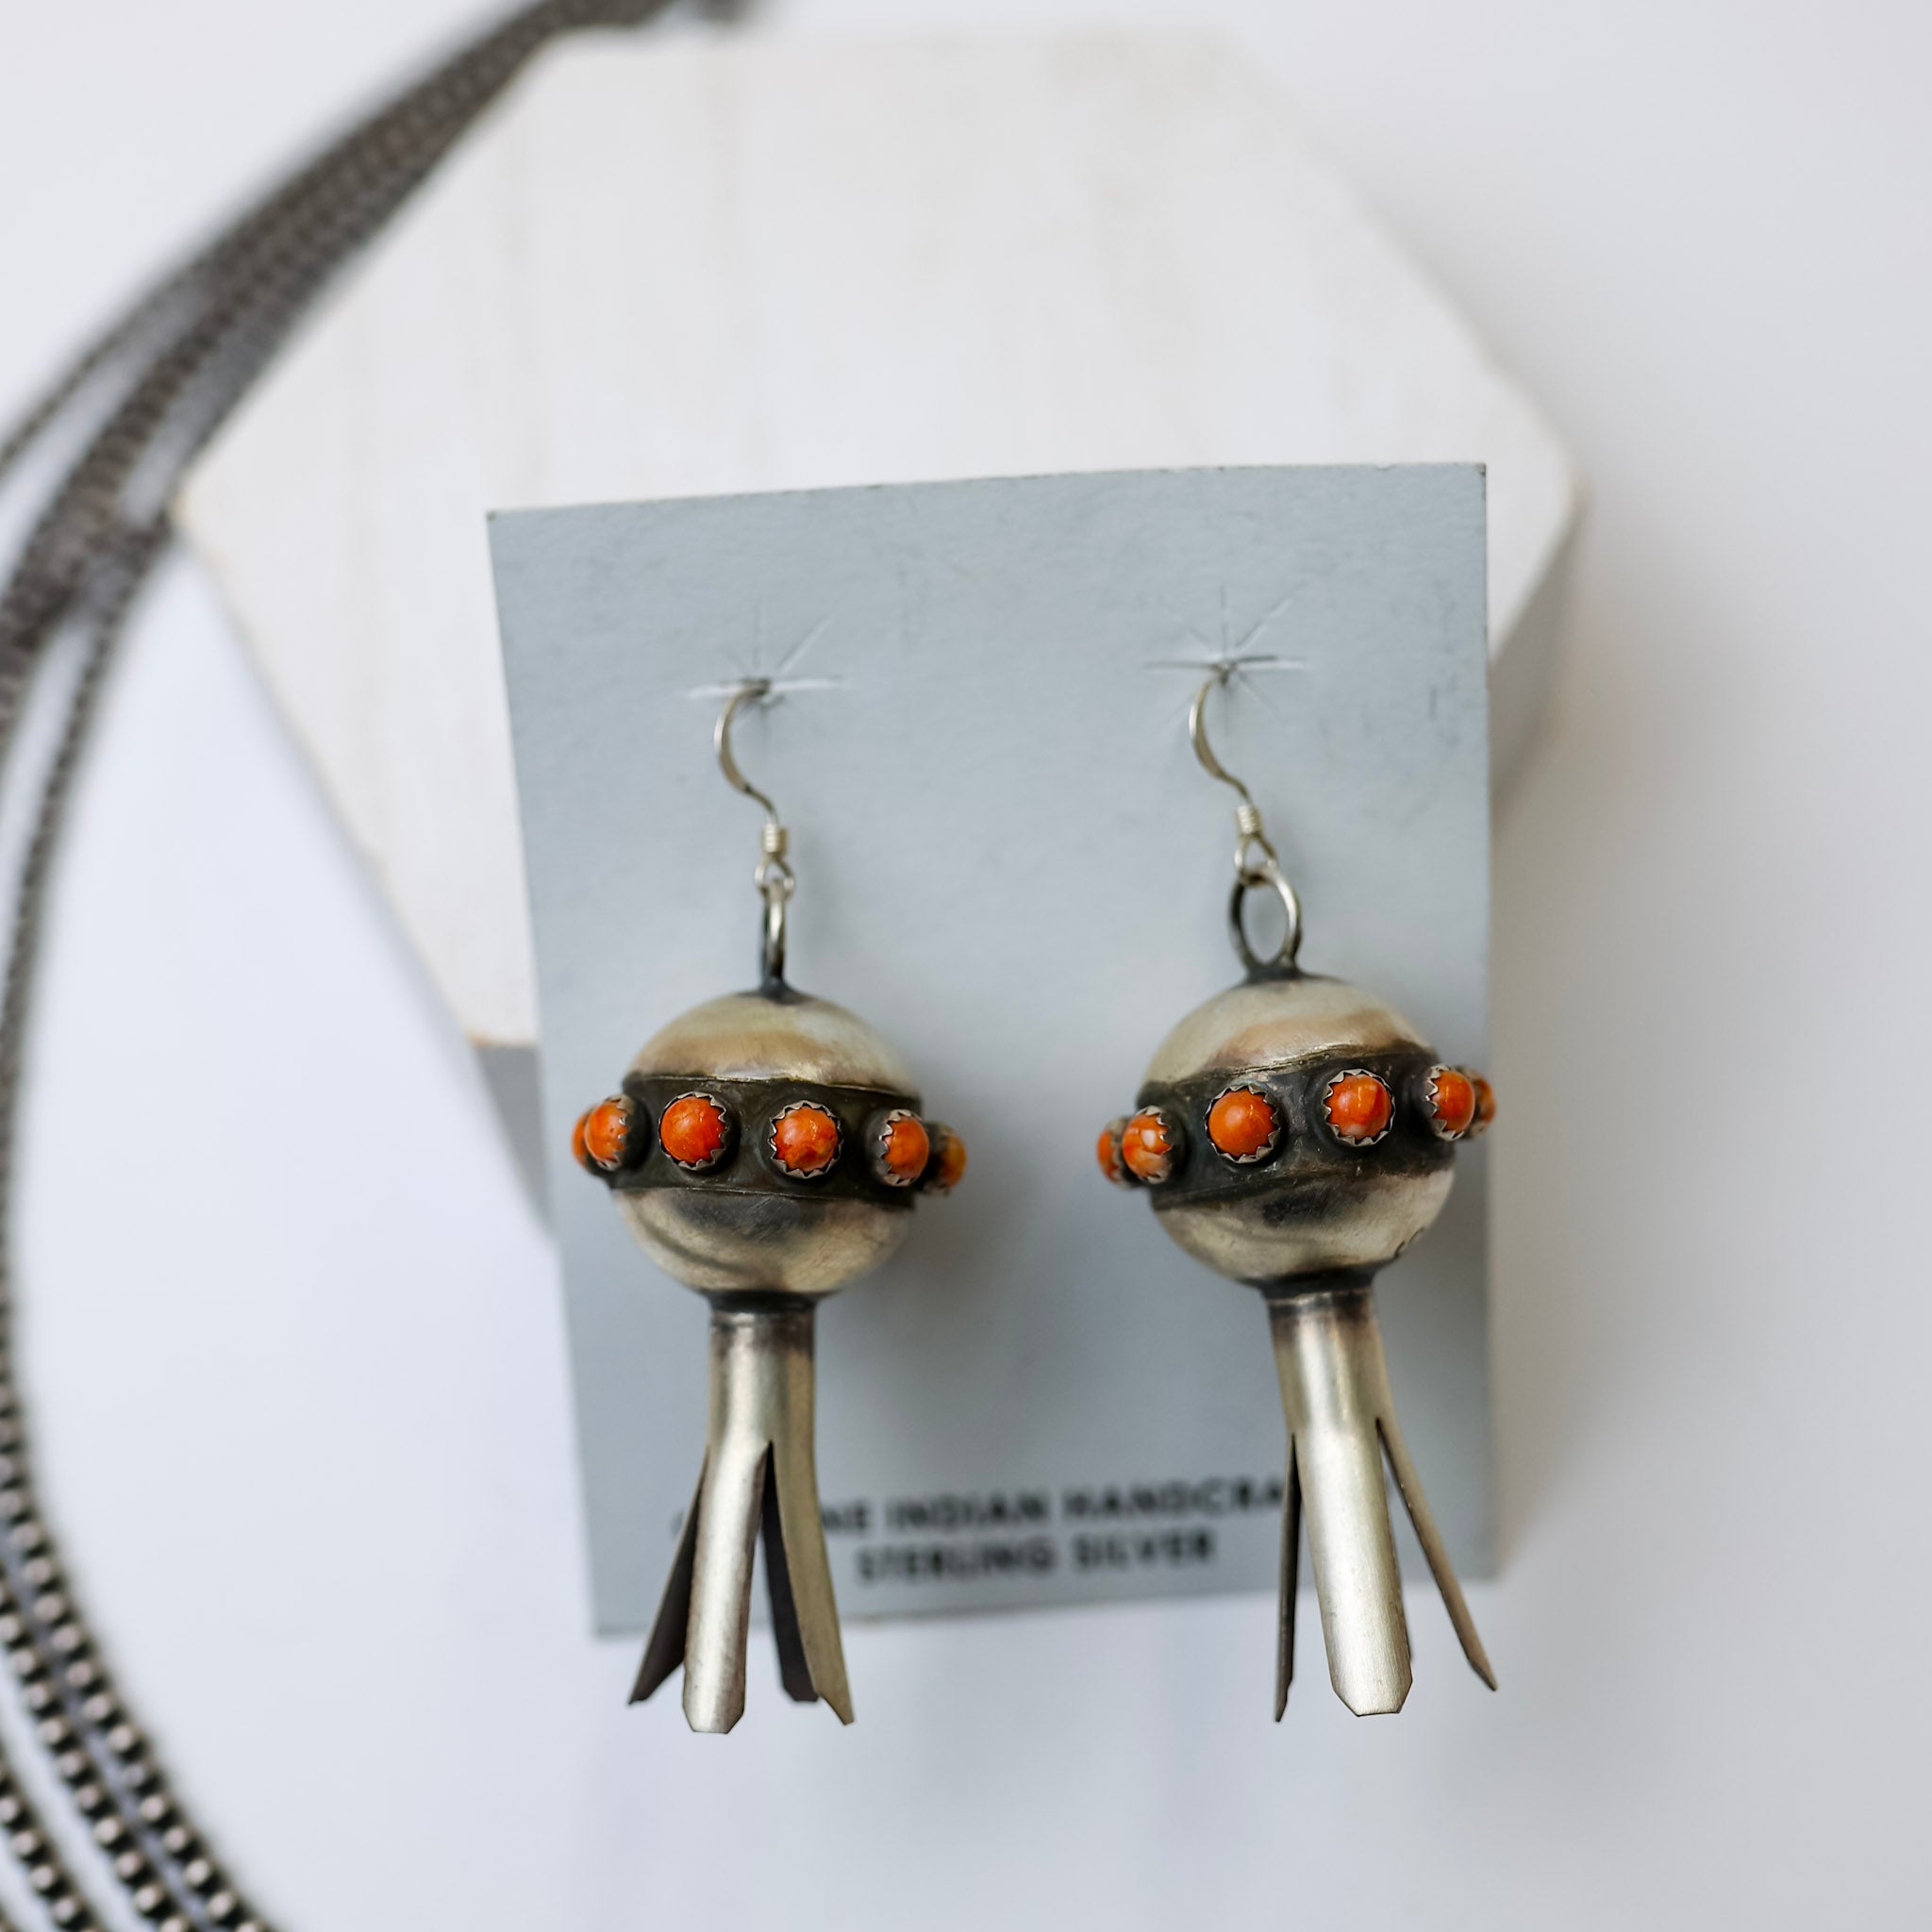 Monica Smith Navajo Handmade Sterling Silver Blossom Earrings with Orange Spiny Oyster is centered in the picture. Navajo pearls are laid to the left of the picture. All on a white background. 